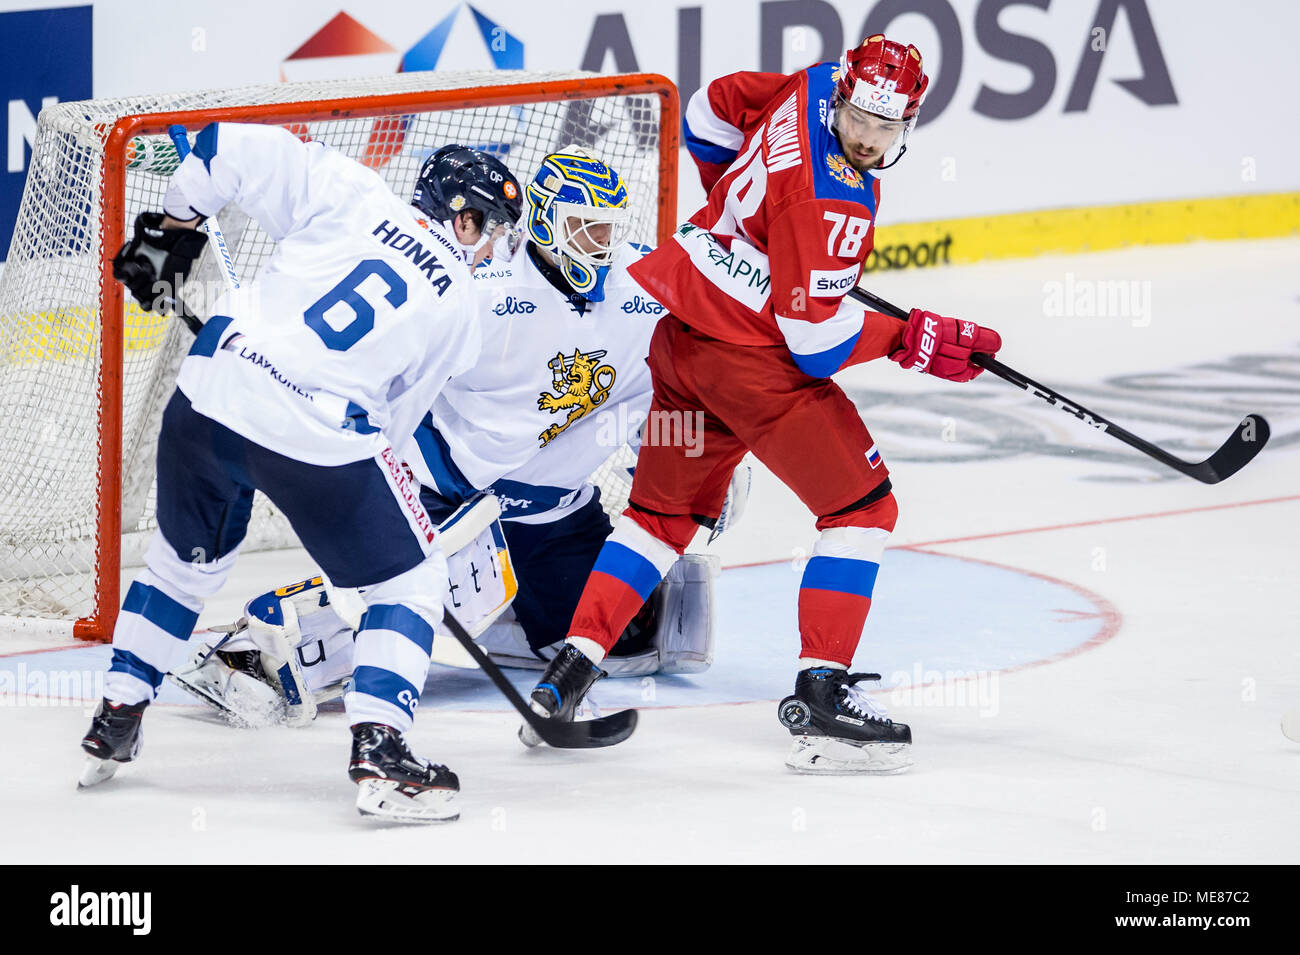 Pardubice, Czech Republic. 21st Apr, 2018. L-R Julius Honka and goalkeeper Ville Husso (both FIN) and Alexei Kruchinin (RUS) in action during the Carlson Hockey Games ice hockey tournament, part of Euro Hockey Tour (EHT) series: Russia vs Finland in Pardubice, Czech Republic, April 21, 2018. Credit: David Tanecek/CTK Photo/Alamy Live News Stock Photo